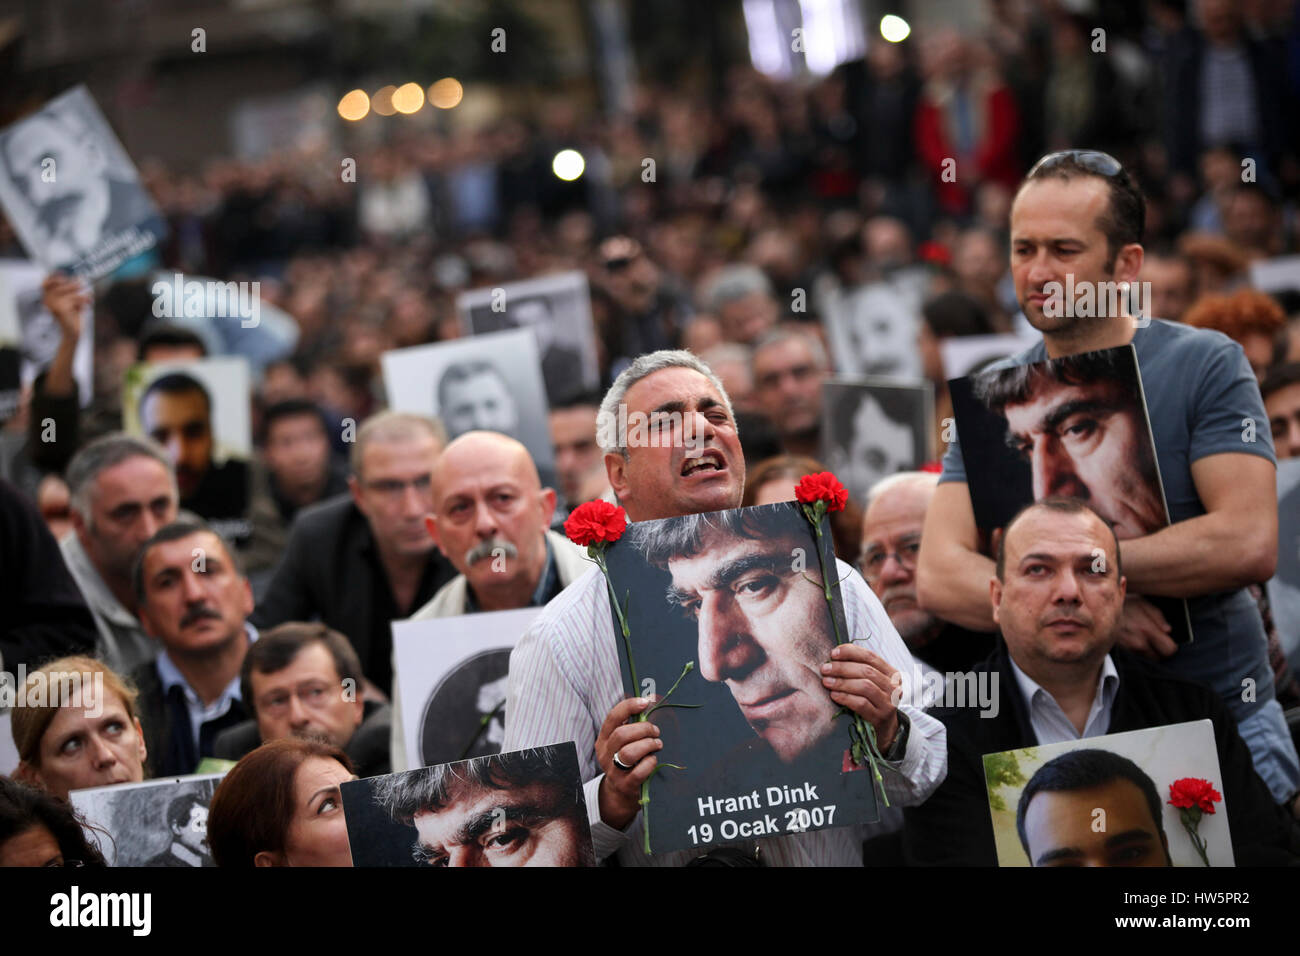 Hrant Dink's wife Rakel Dink (on the middle).  People are protesting the murder of journalist Hrant Dink. Istanbul, Turkey. April 24, 2014 Stock Photo